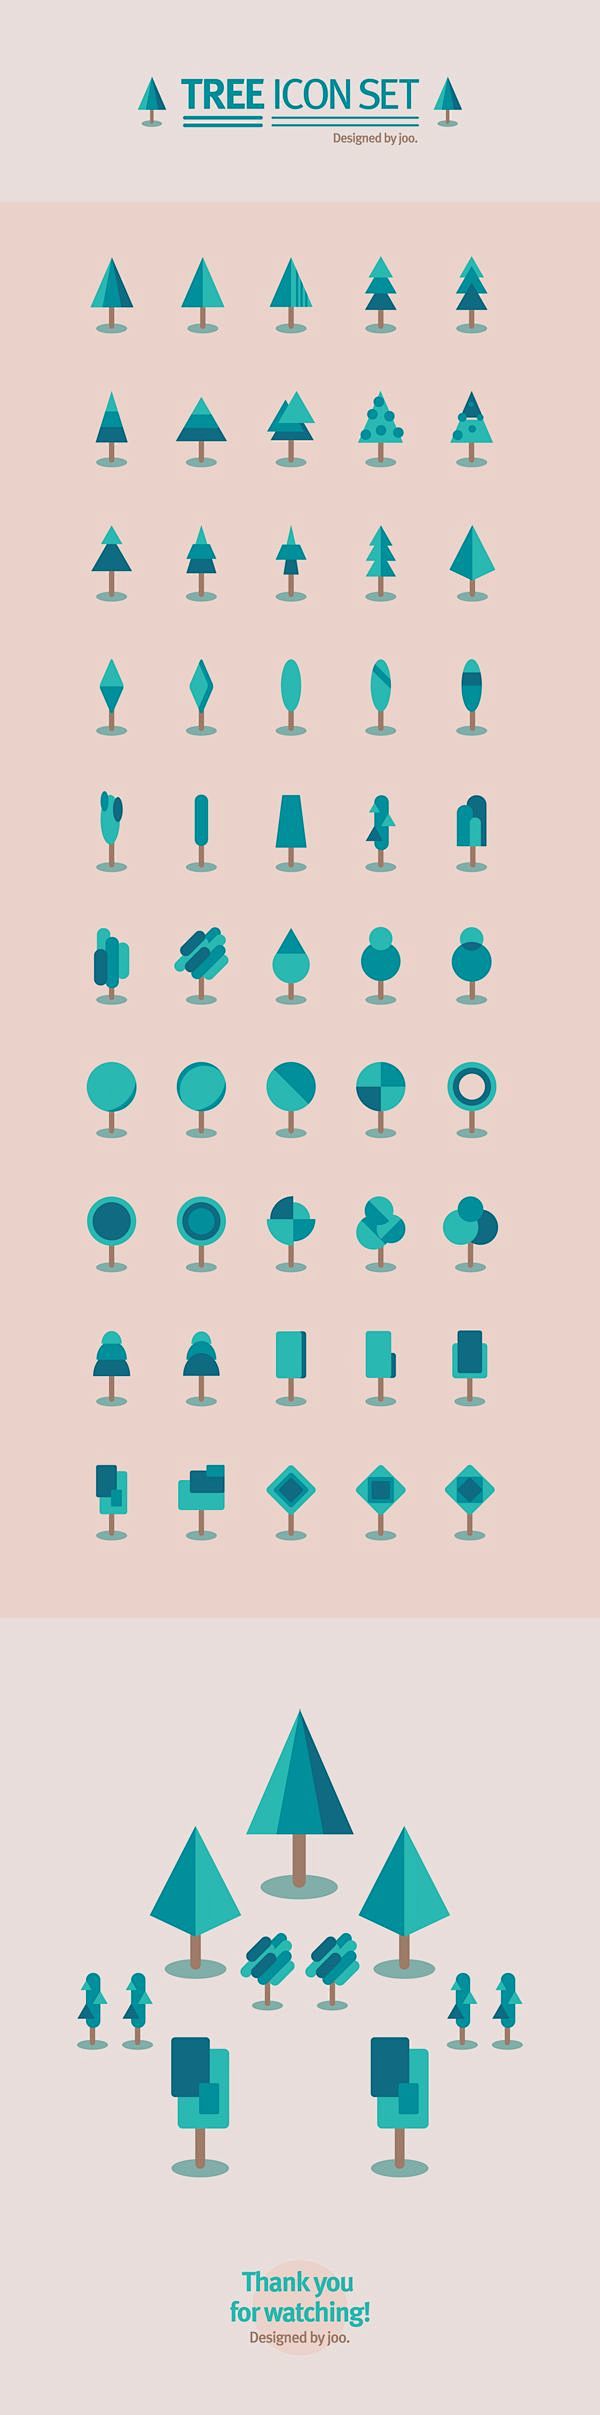 50 tree icon set by ...